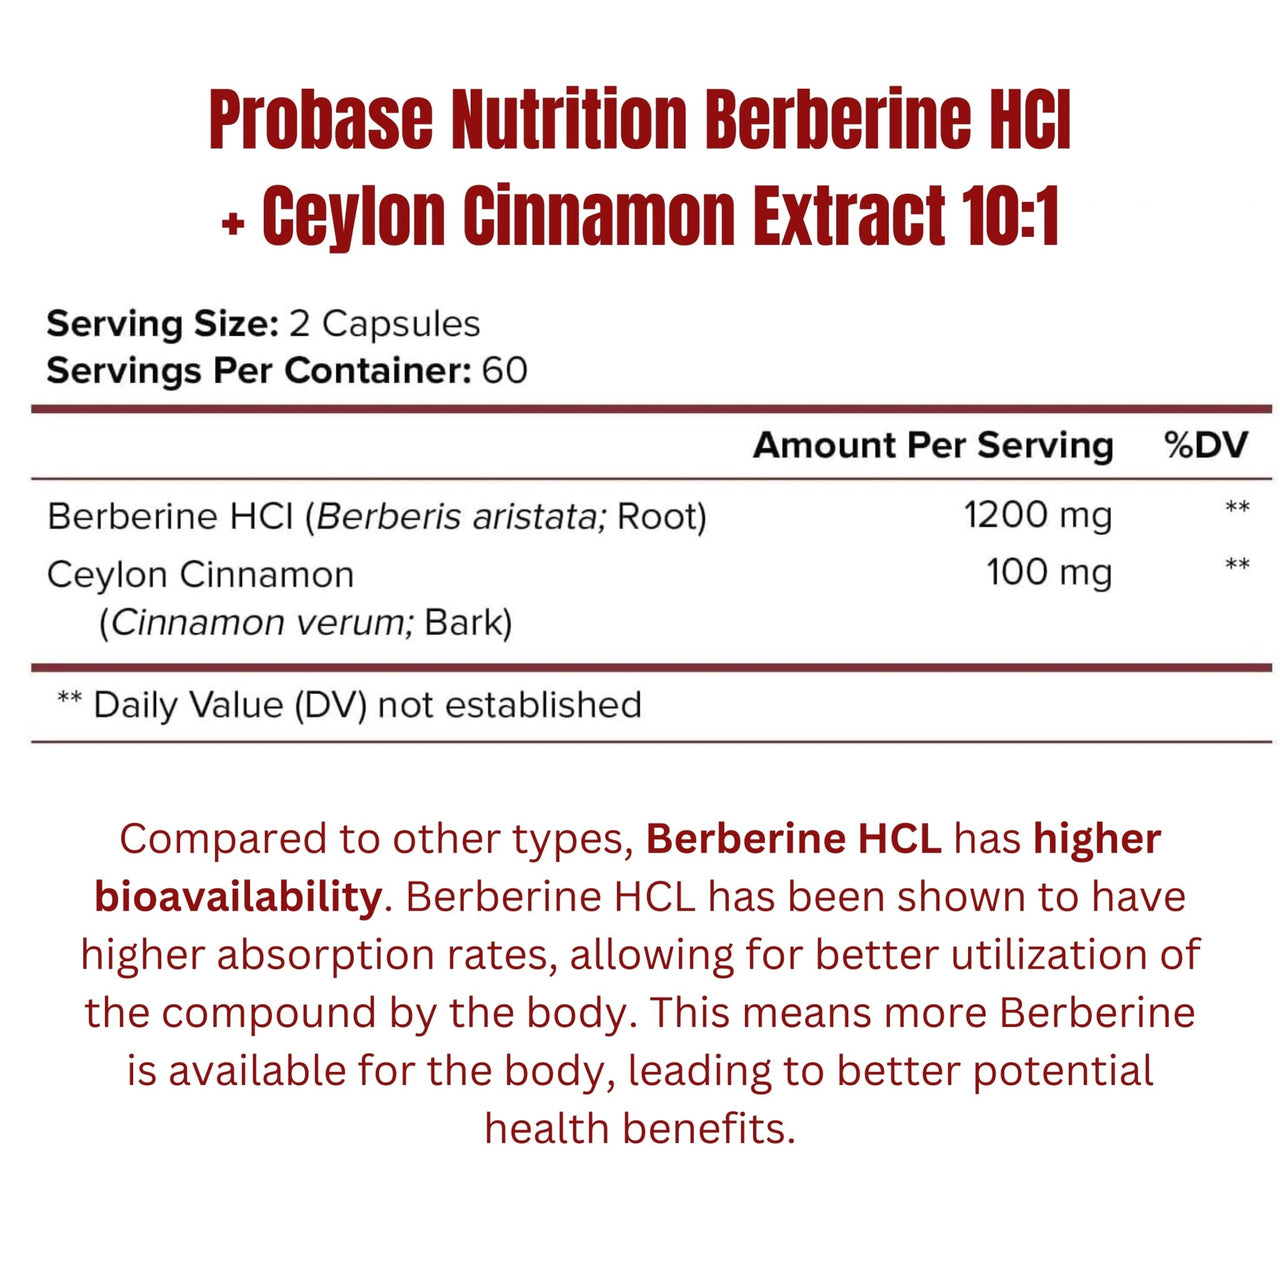 Probase Premium Berberine HCI 1200mg, 120 Capsules - Plus Ceylon Cinnamon Extract 10:1, Berberine HCL Root Supplements Pills - Supports Glucose Metabolism, Immune System, Healthy Weight Management - Probase Nutrition